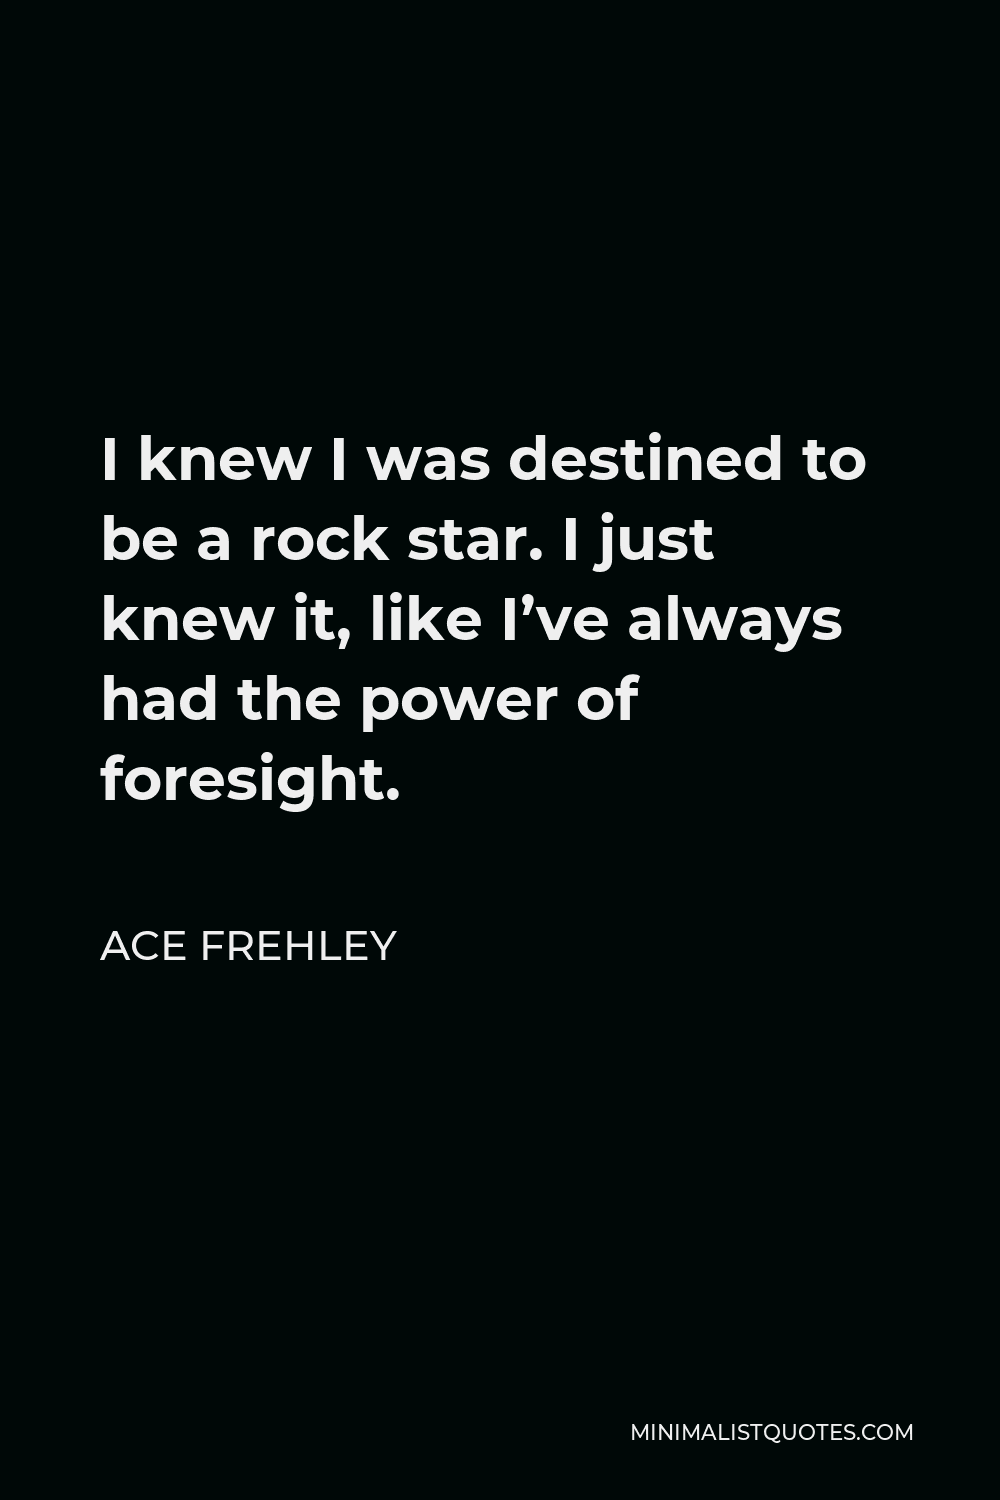 Ace Frehley Quote - I knew I was destined to be a rock star. I just knew it, like I’ve always had the power of foresight.